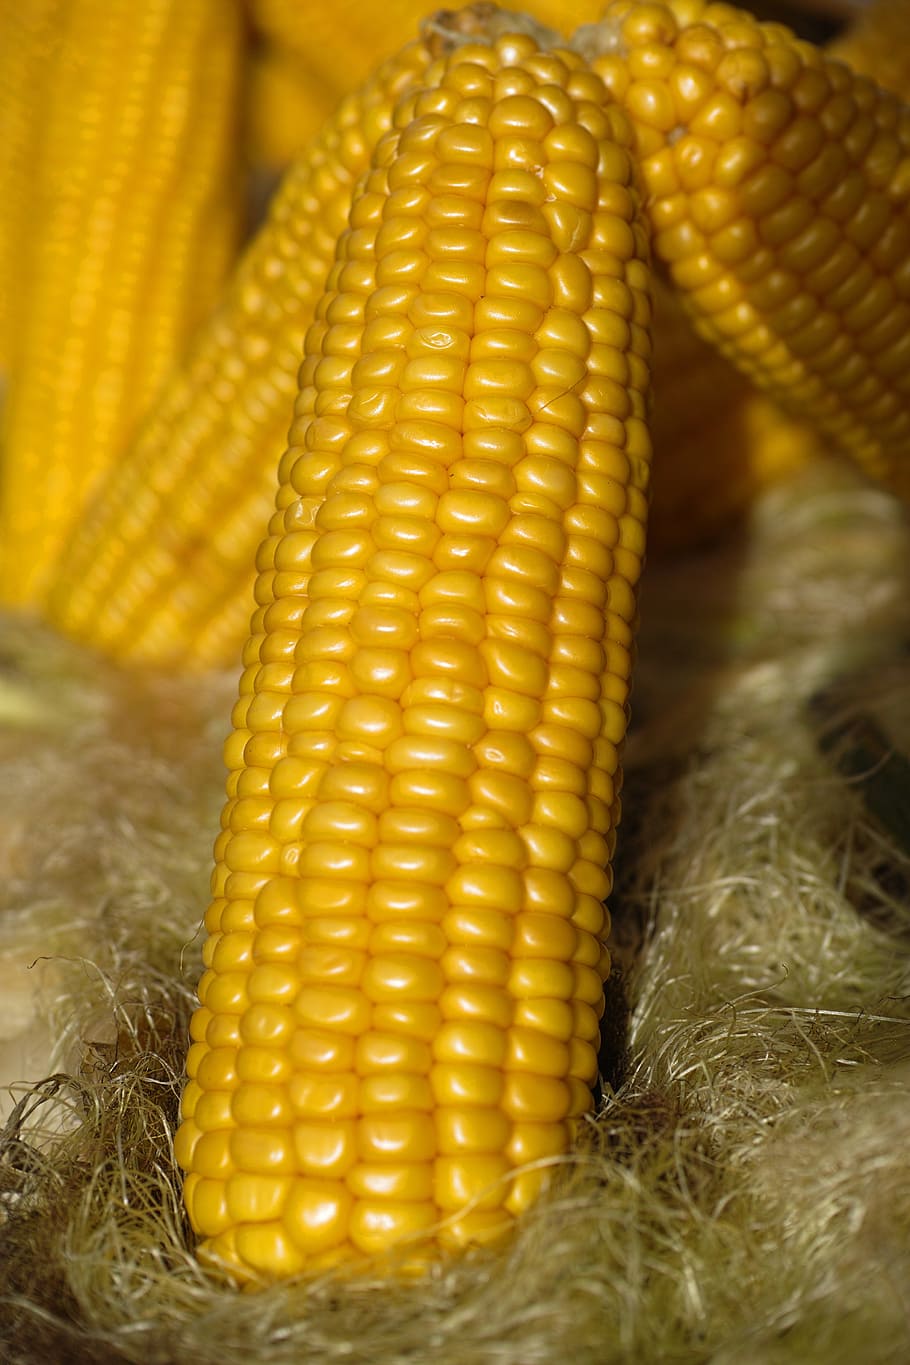 corn cobs, egypt, baked, grill, roasted, yellow, one, detail, food, delicious